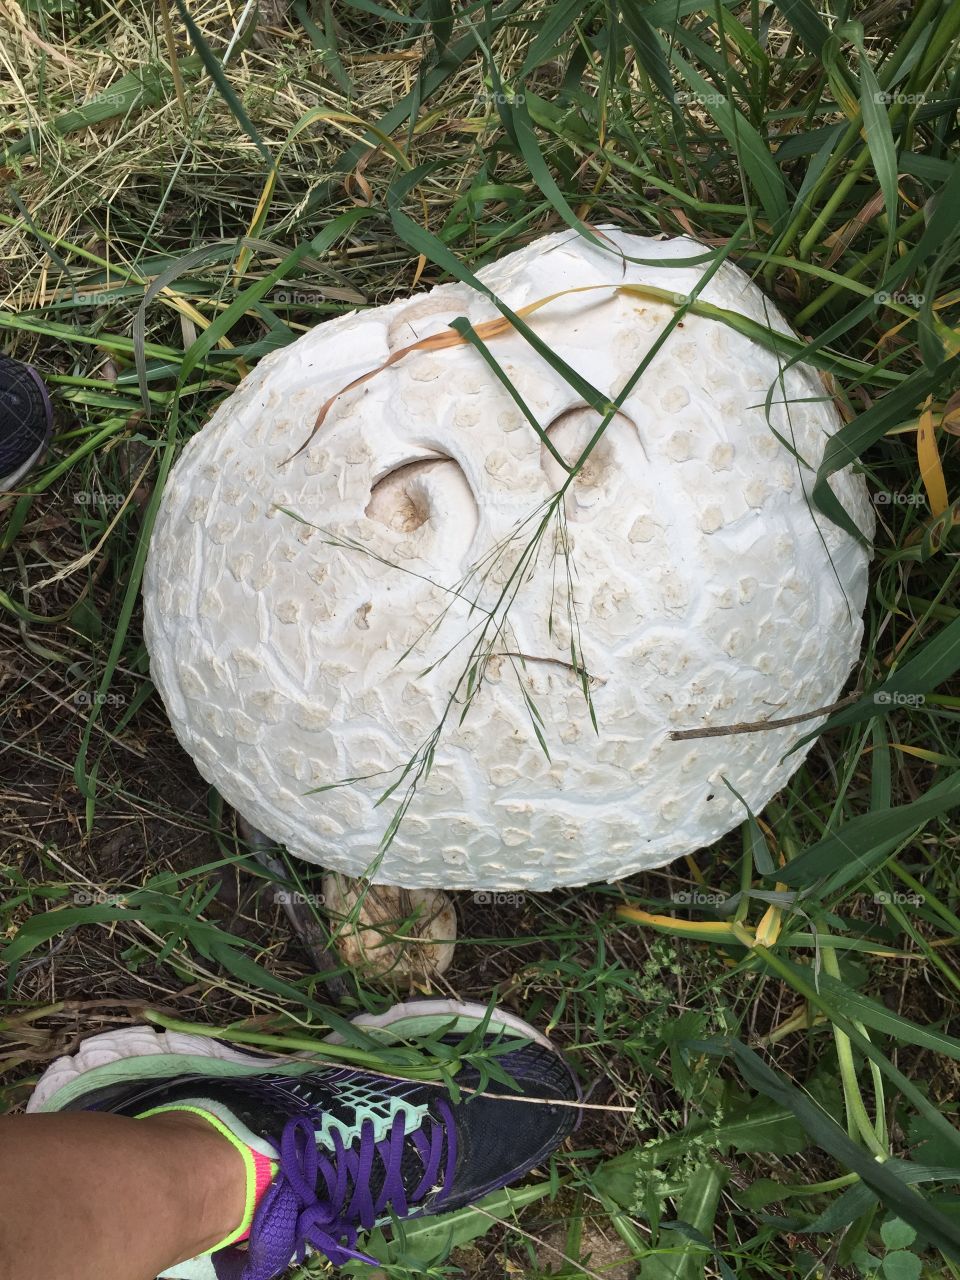 May be largest mushroom of this type I have come across . 